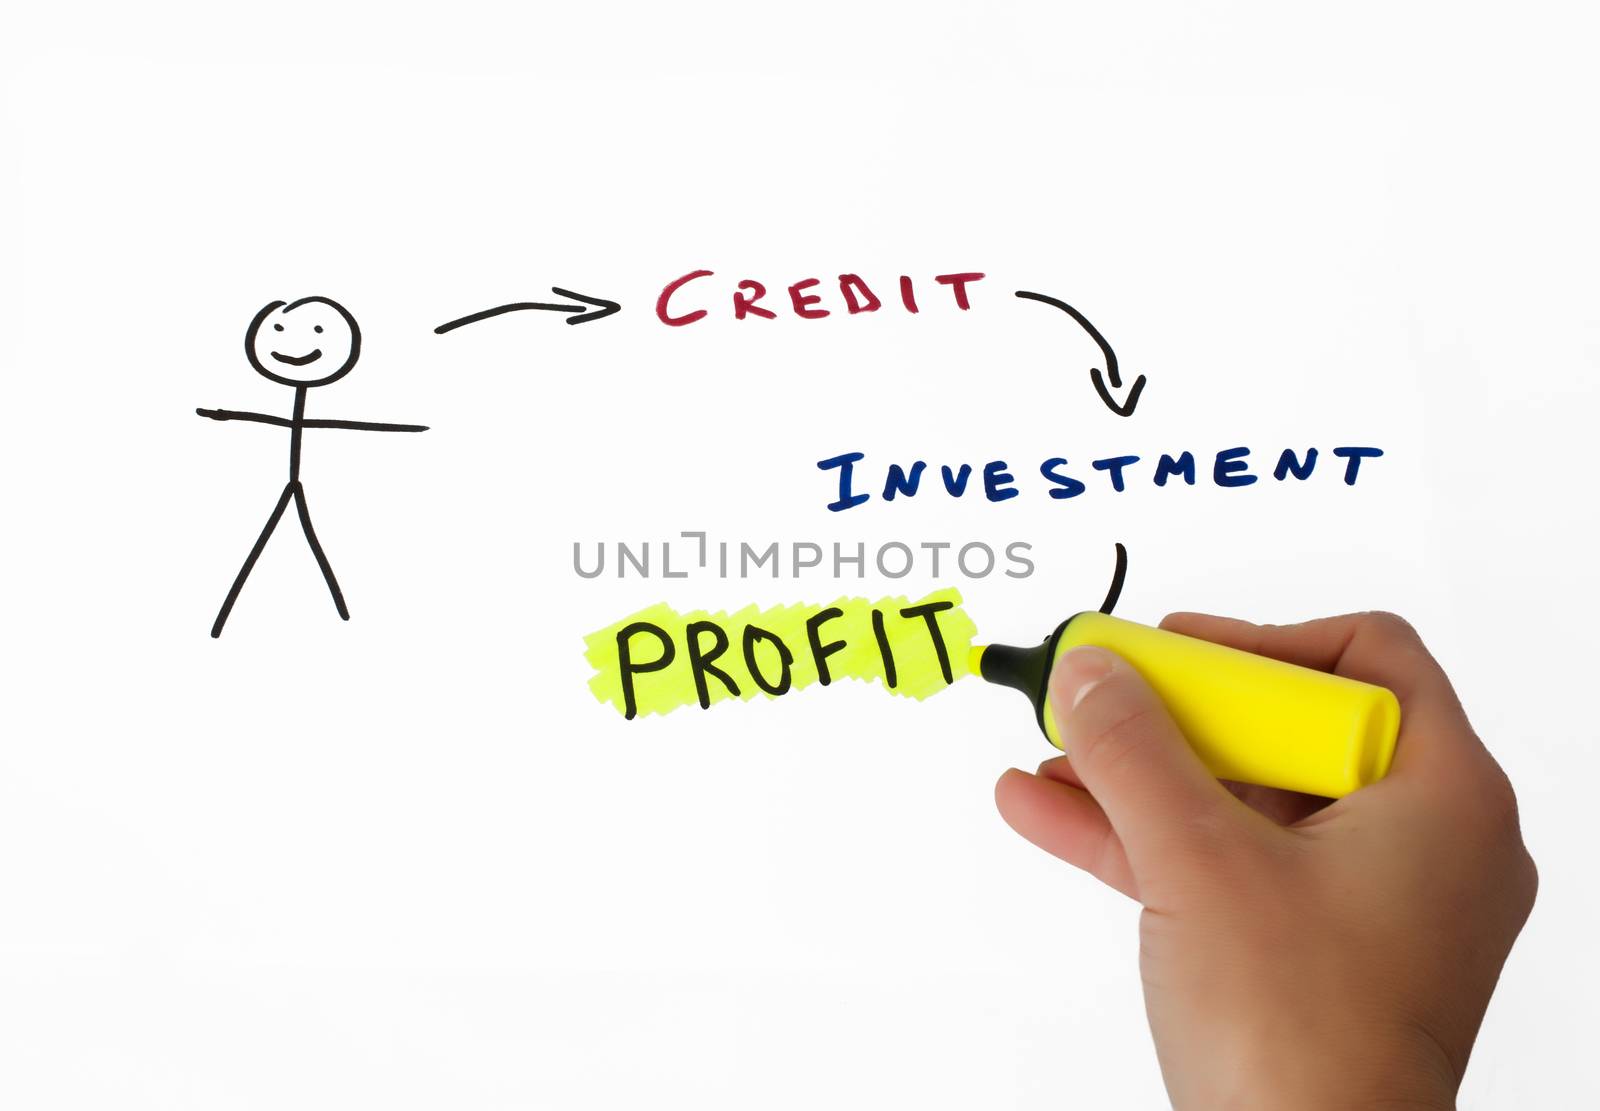 Credit and investments conception illustration over white. Hand that writes